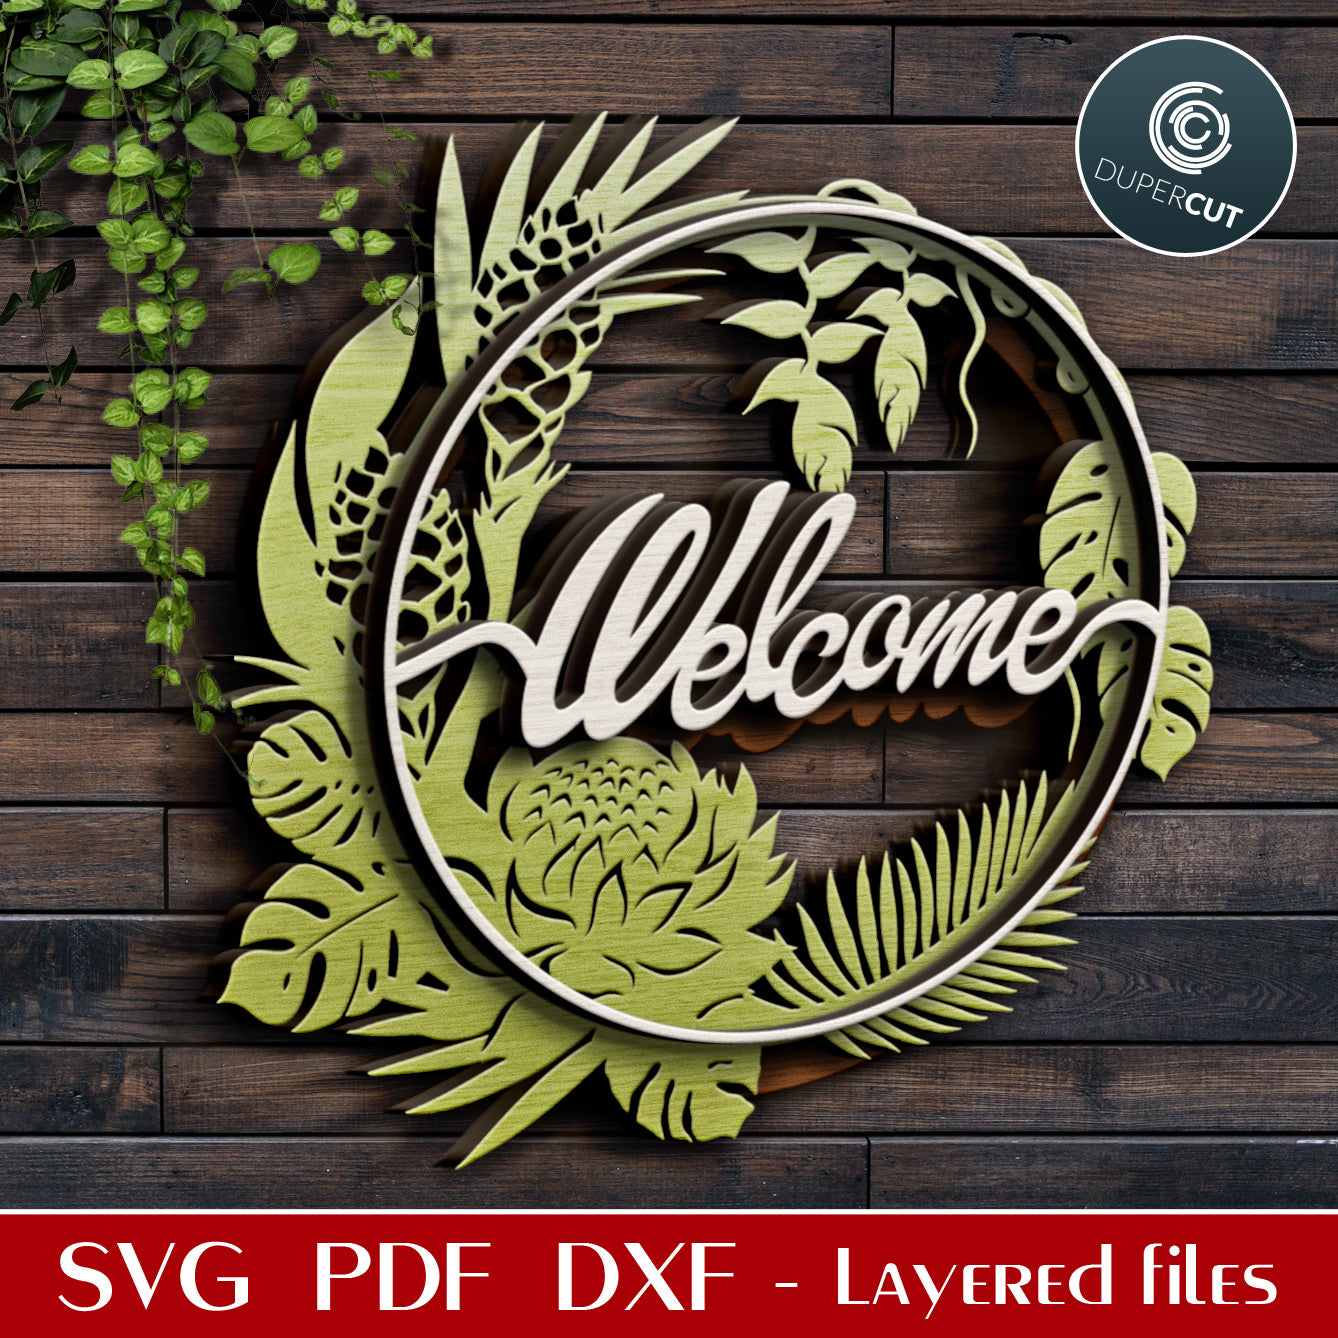 Tropical welcome sign - layered laser cutting files SVG PDF DXF templates for commercial use. Glowforge, Cricut, Silhouette Cameo, CNC plasma machines